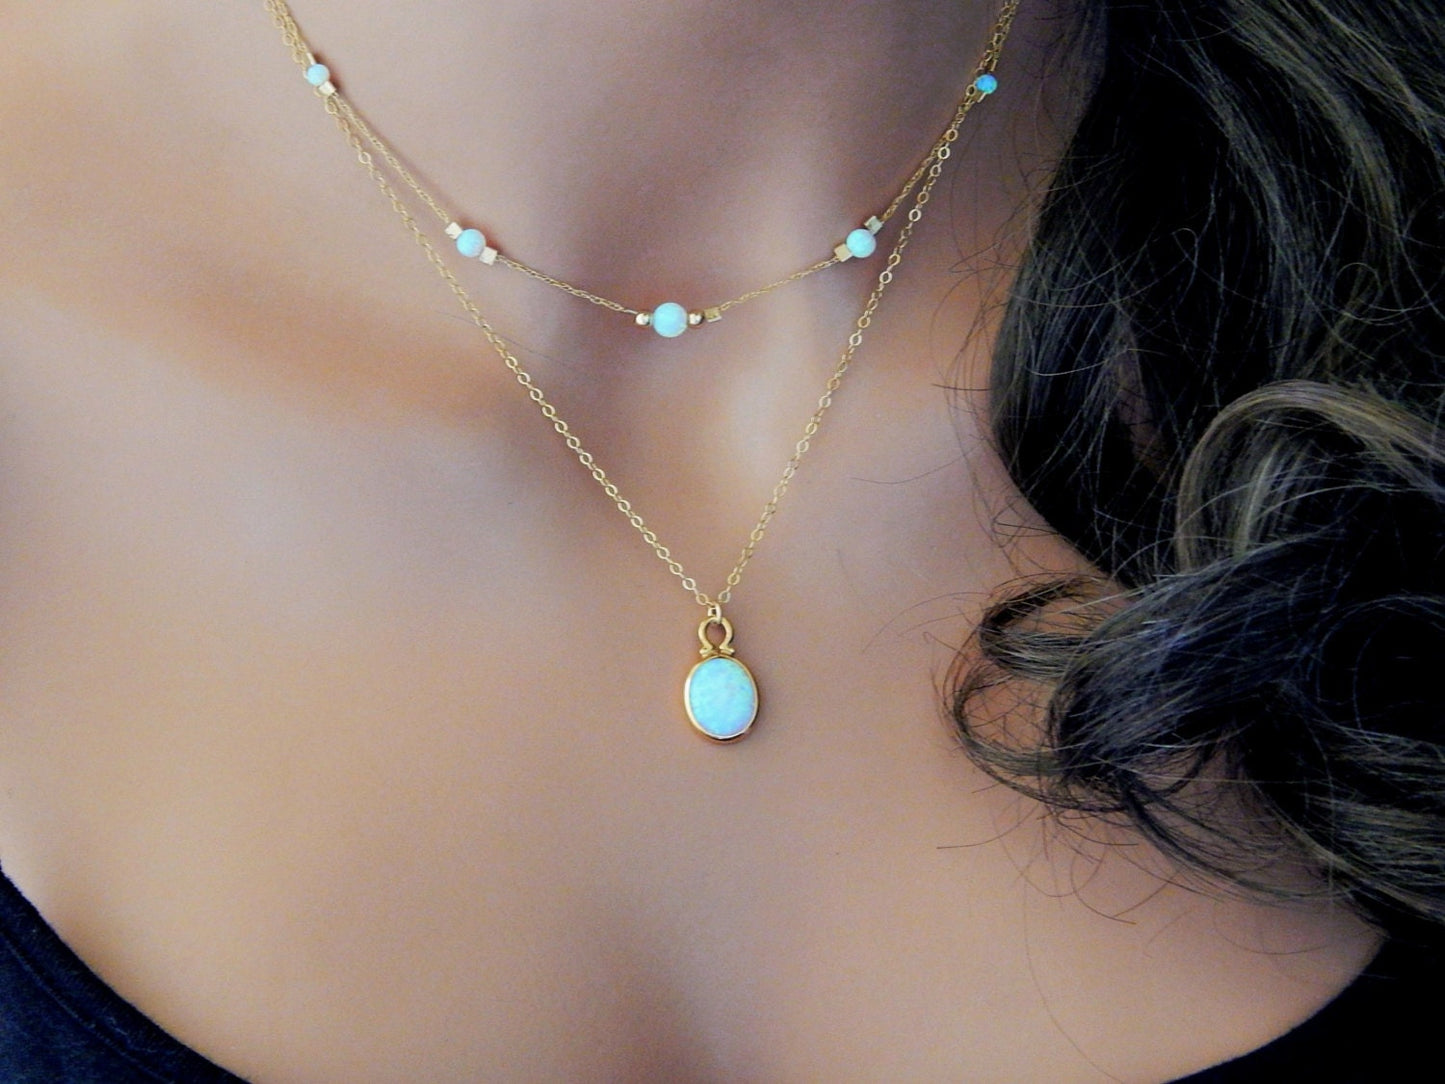 Two handcrafted opal and gold necklaces layered together worn on a model's neck.